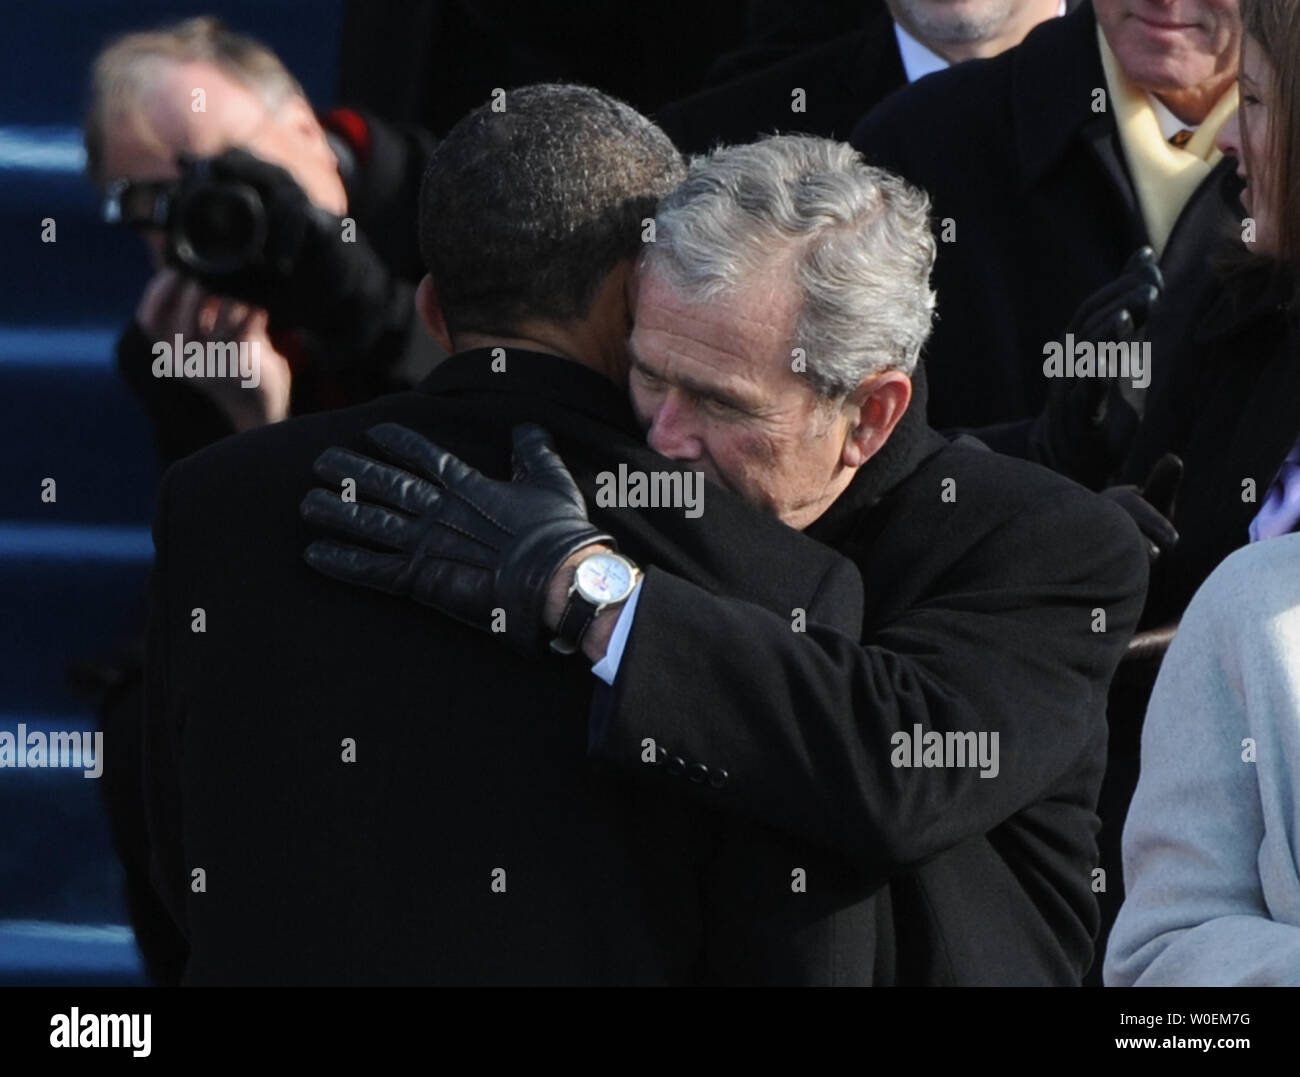 President Barack Obama (L) is hugged by former President George W. Bush after Obama was sworn-in as the 44th President of the United States on the west steps of the Capitol on January 20, 2009.  (UPI Photo/Pat Benic) Stock Photo